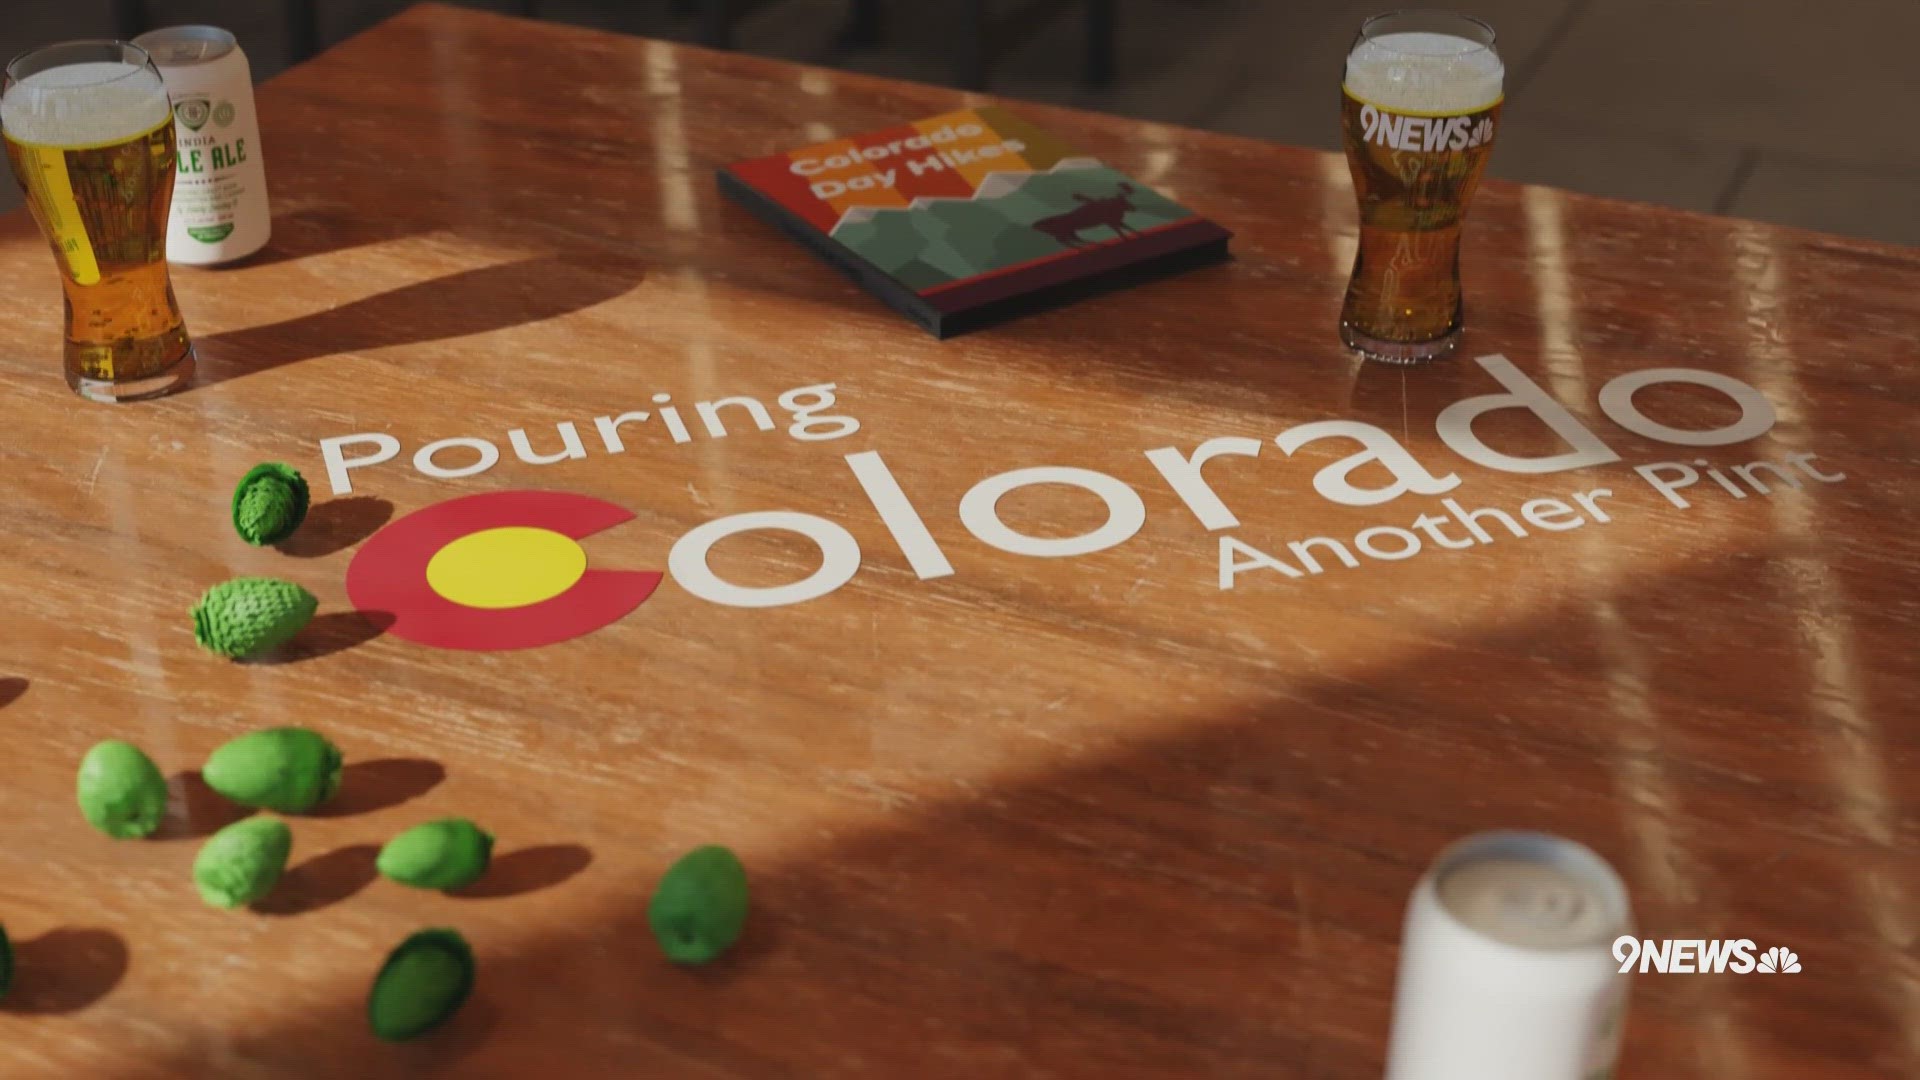 Pouring Colorado looks at the rise, fall and rebirth of brewing in Colorado, the struggles the industry endured and the drive to make the industry more inclusive.